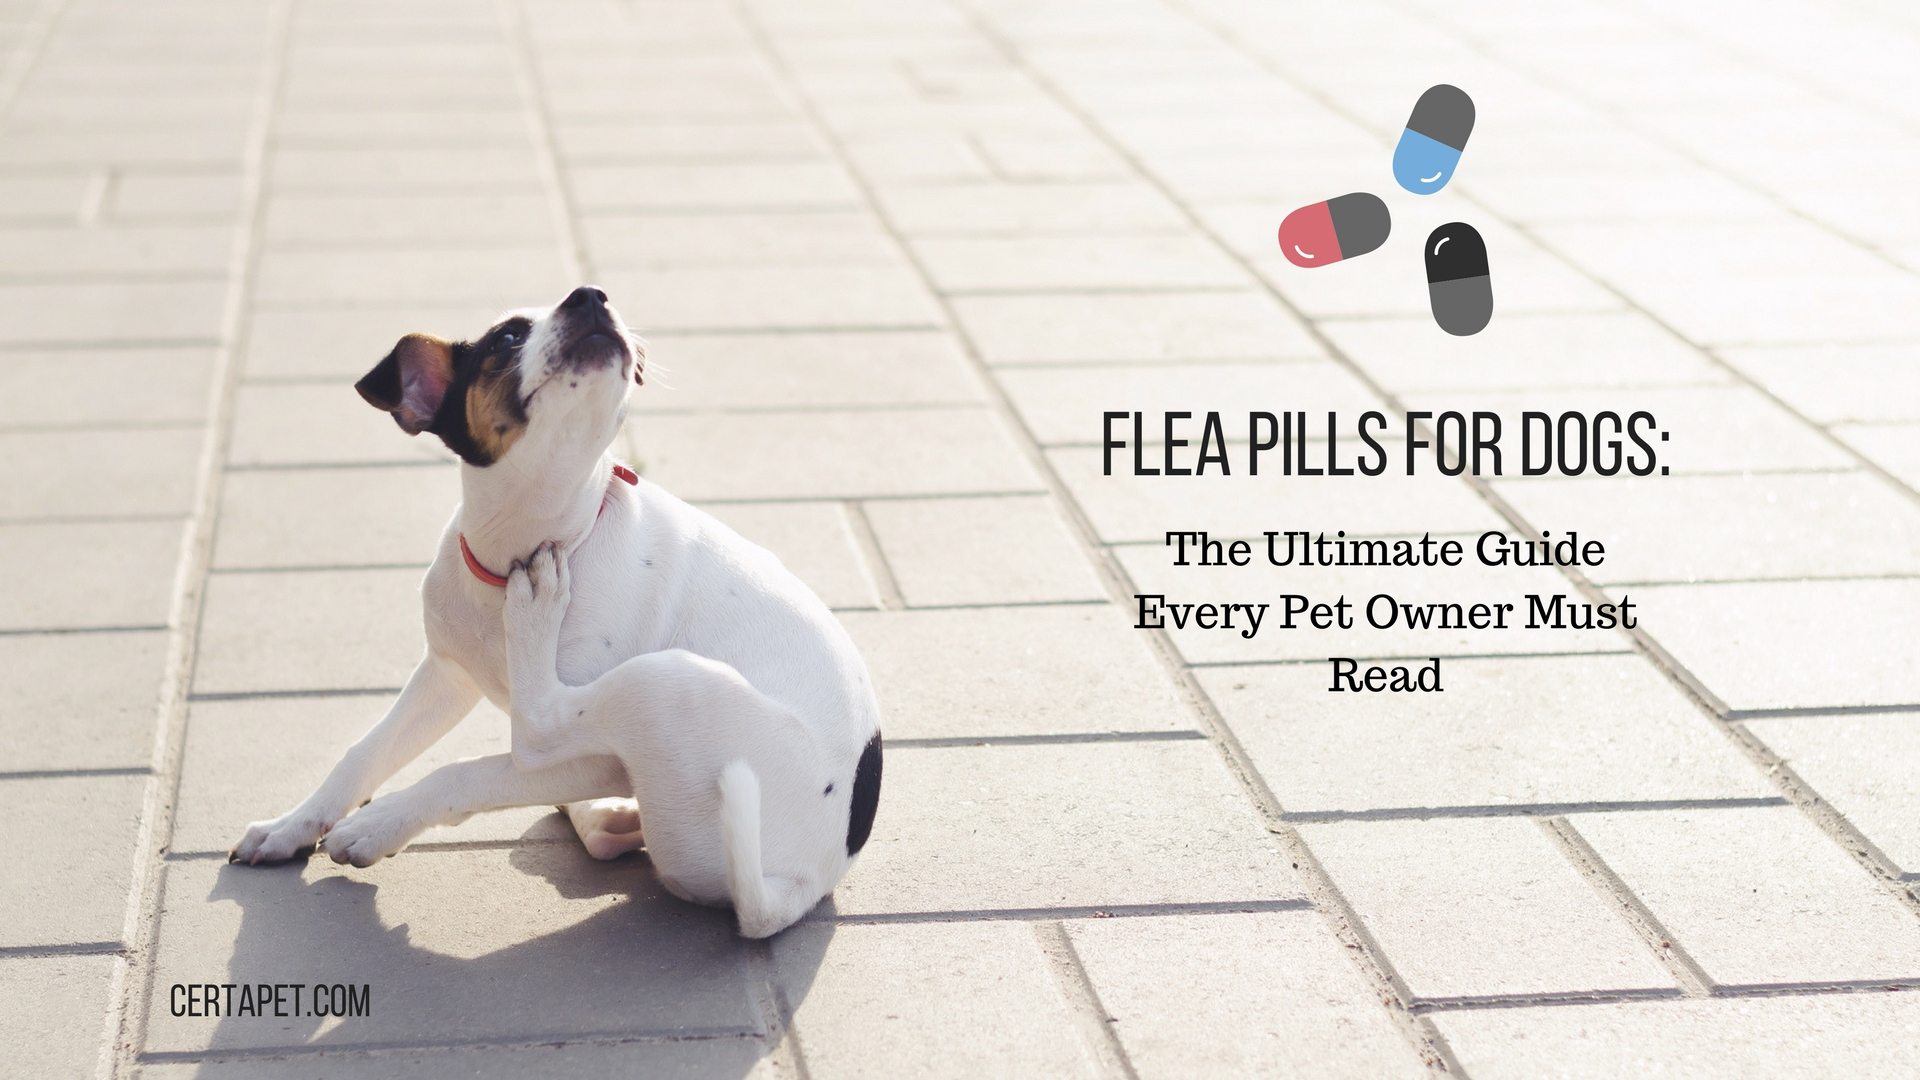 flea pills for dogs that last 30 days